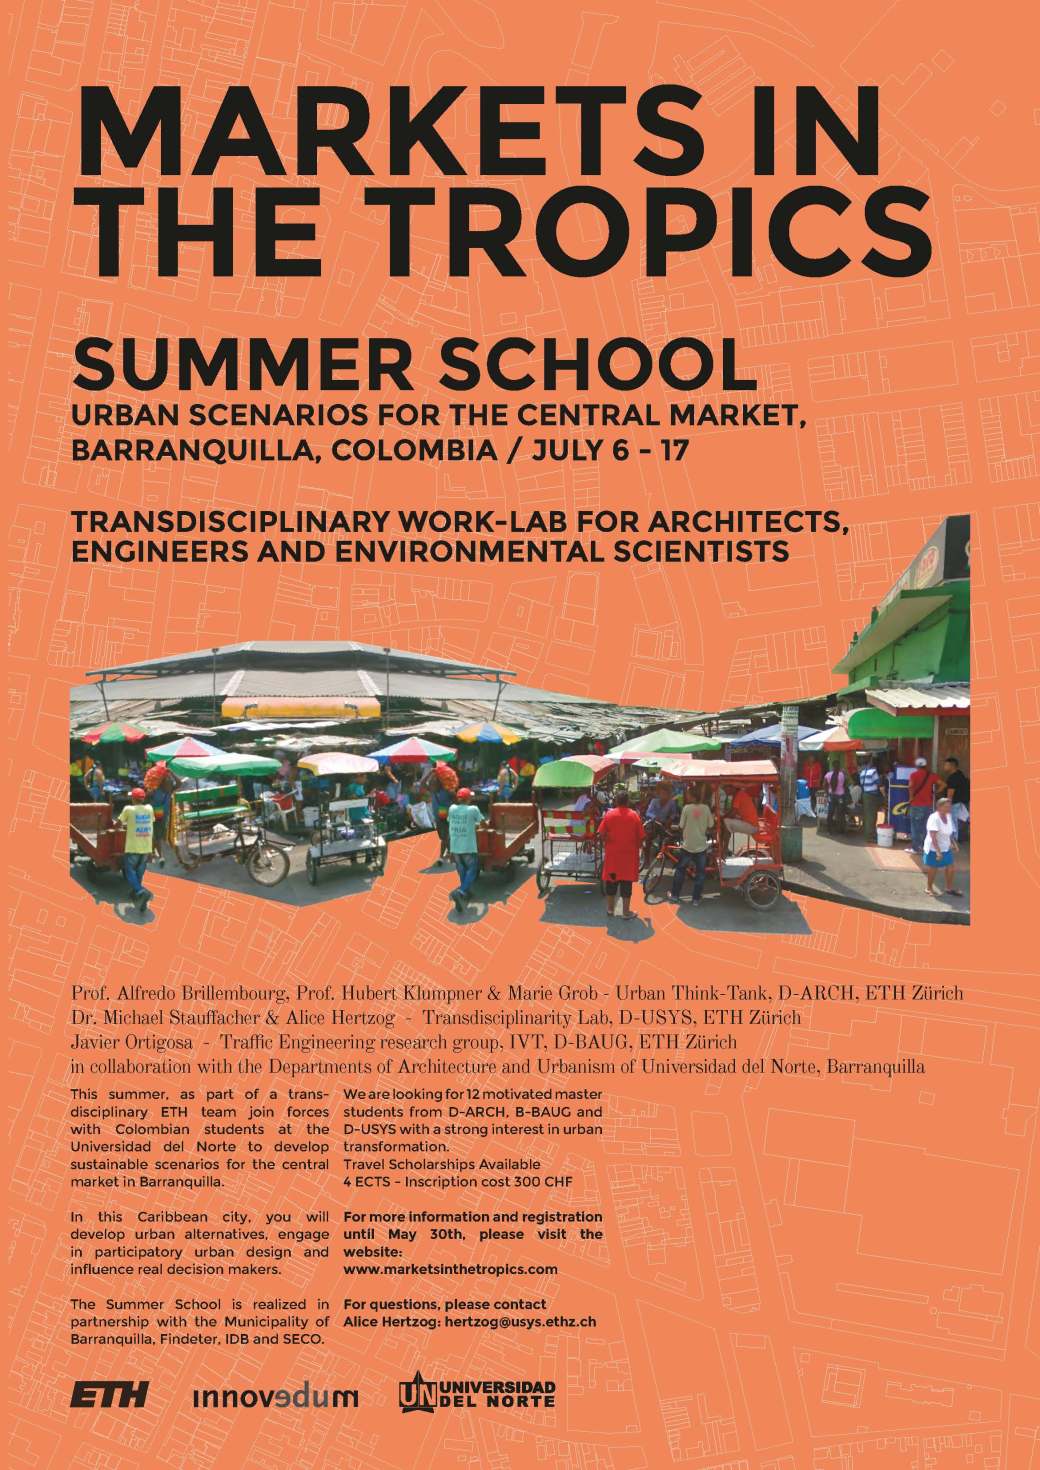 Applications are now open for 2015 apply here: http://marketsinthetropics.com/apply-for-2015/